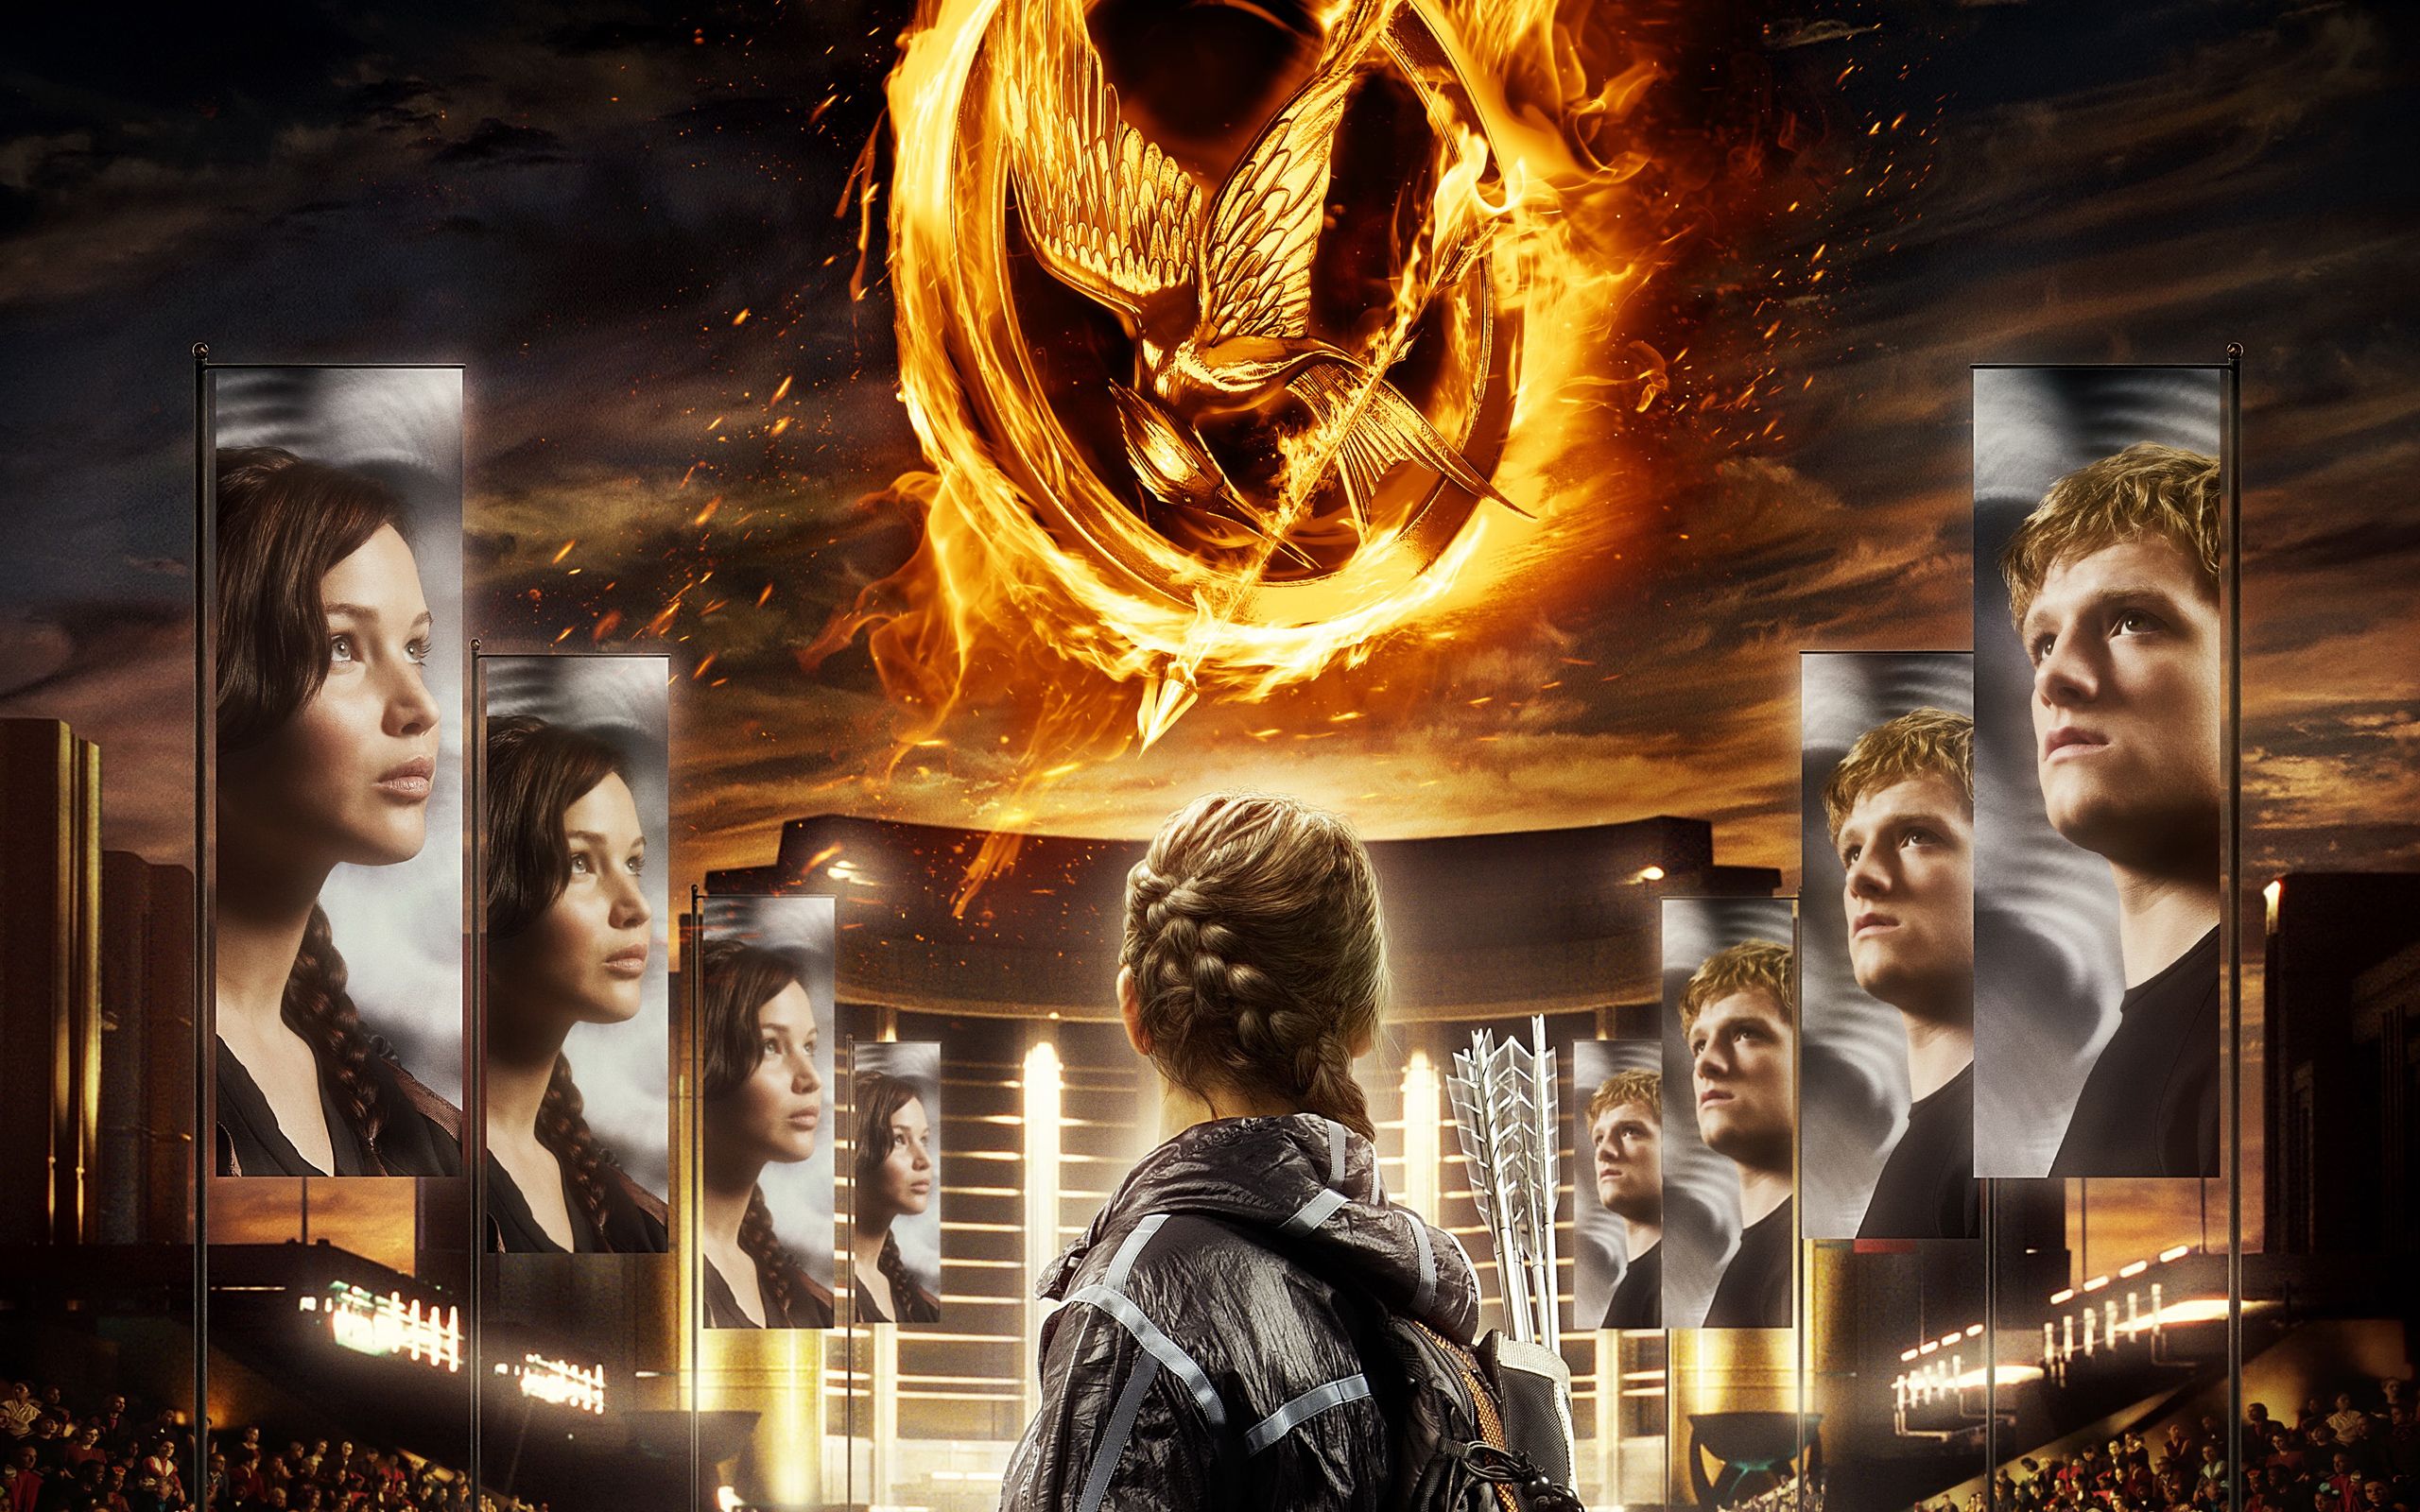 The Hunger Games Wallpaper, Pctures Cool Backgrounds